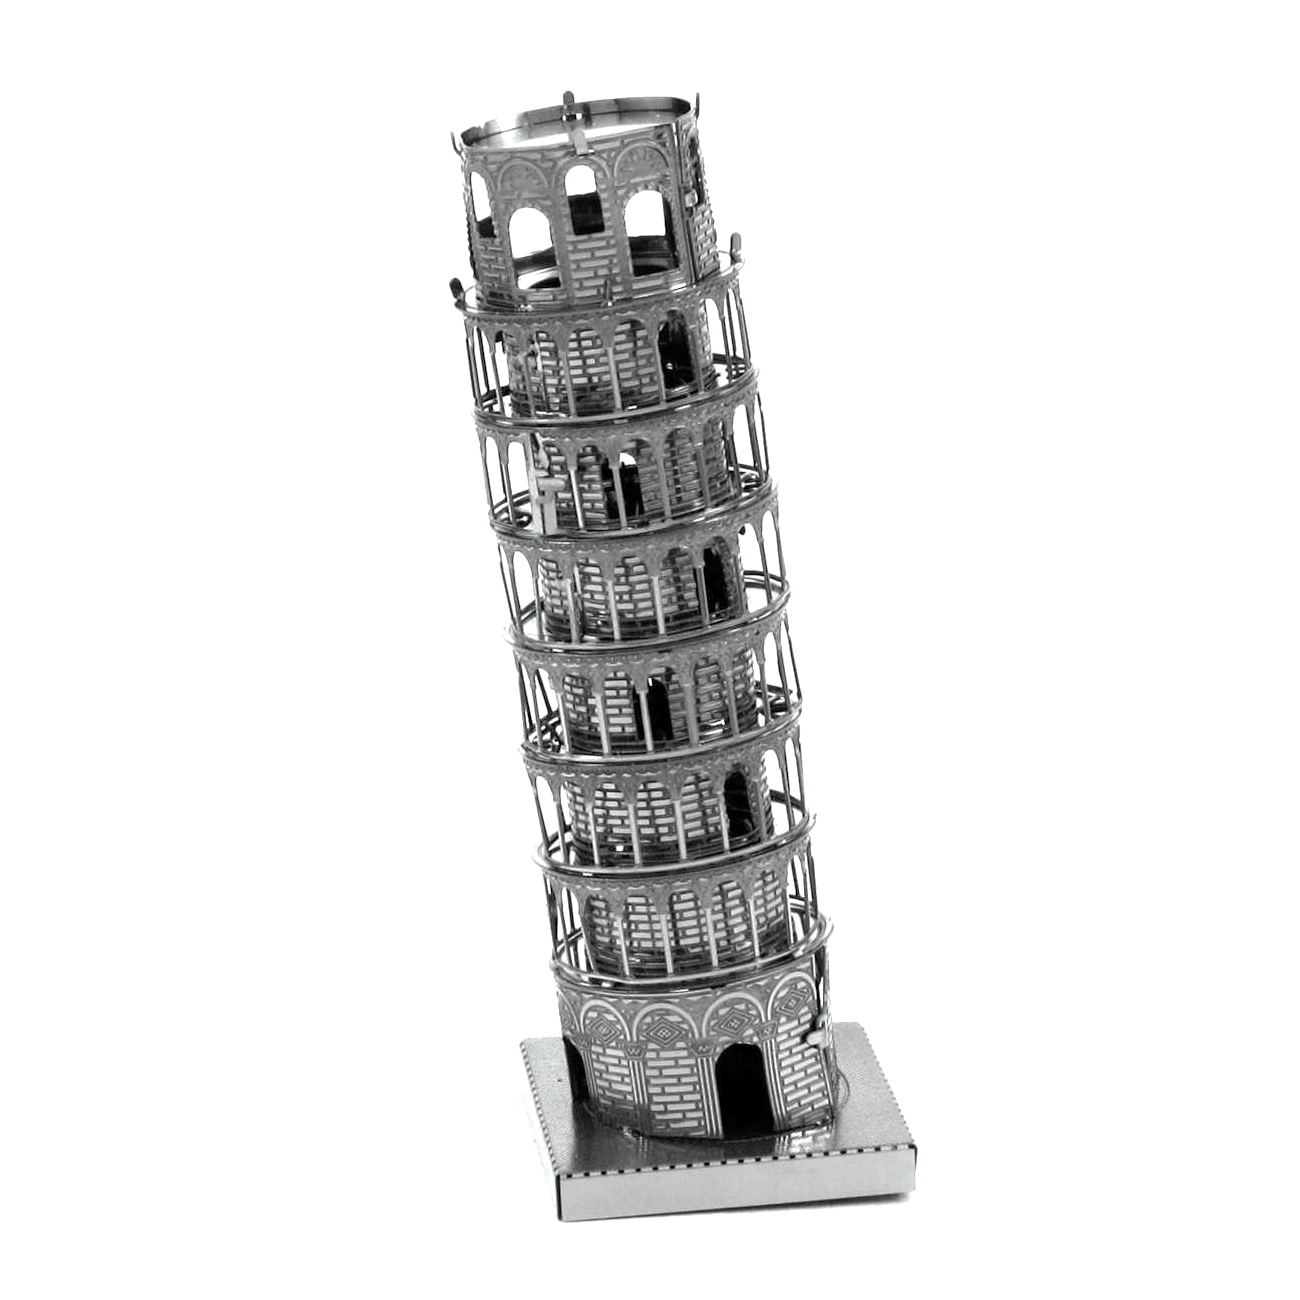 3D Jigsaw Puzzle - Tower of Pisa 